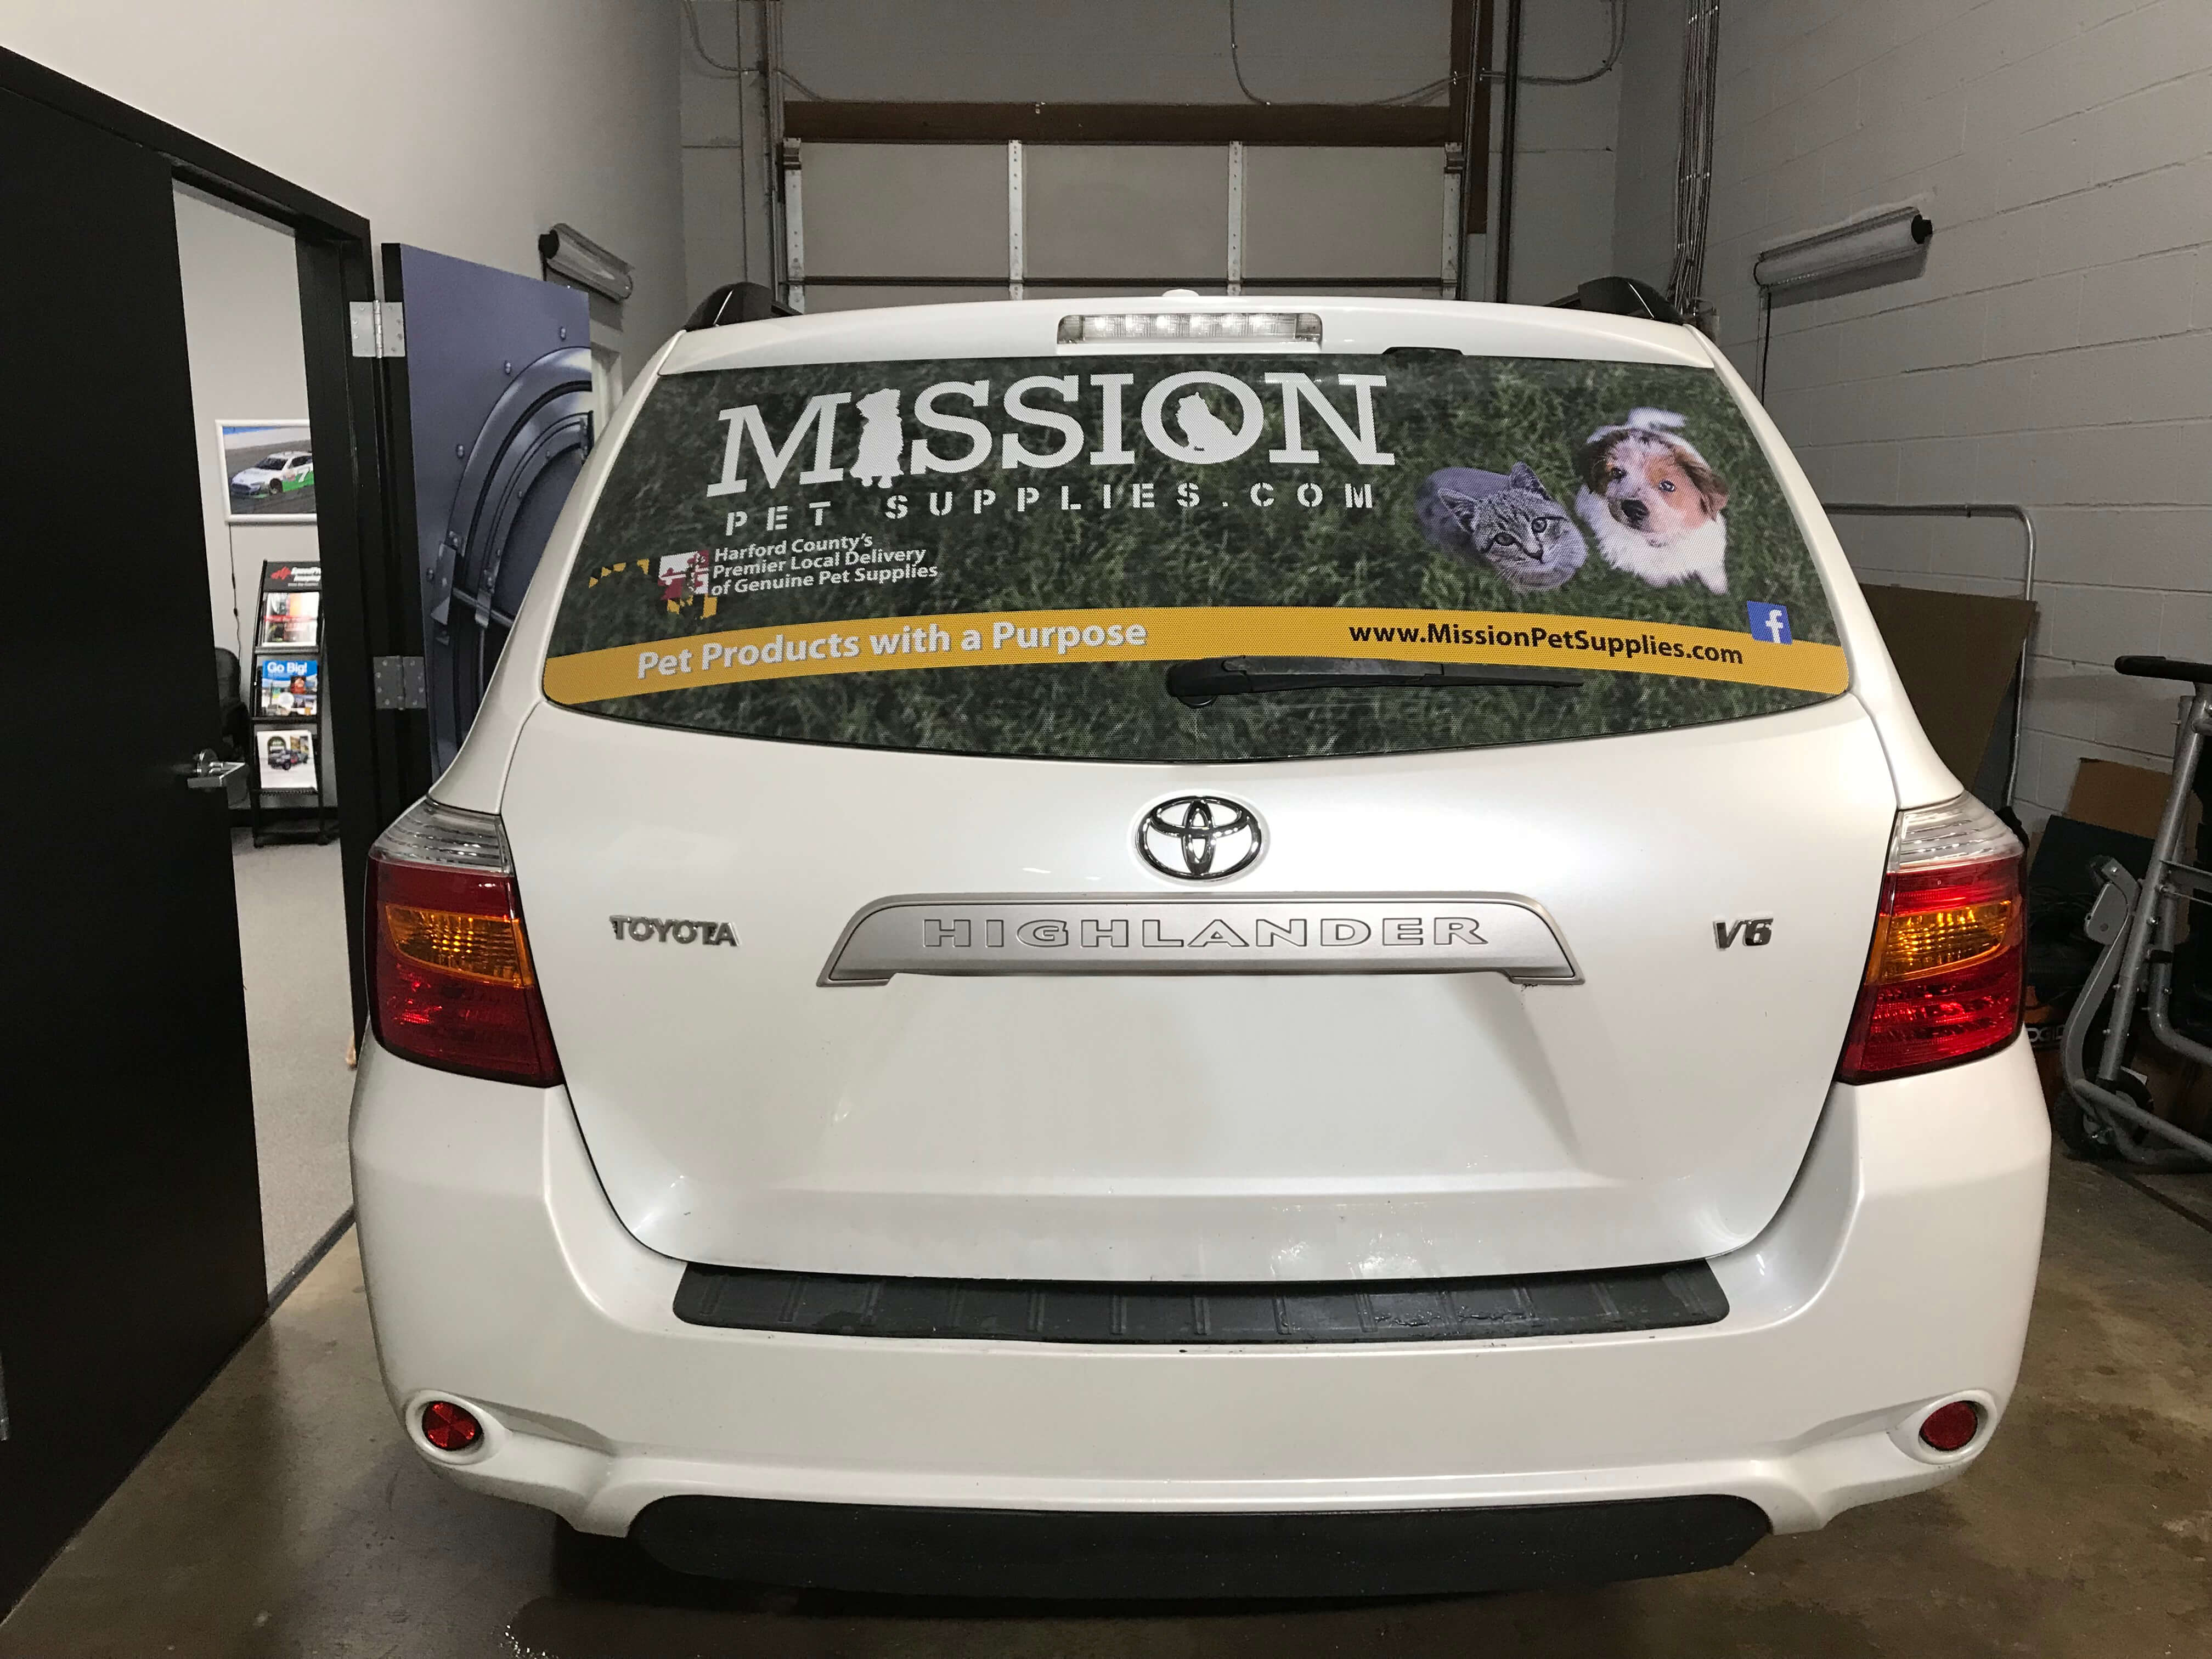 Mission Pet Supplies vehicle window graphic